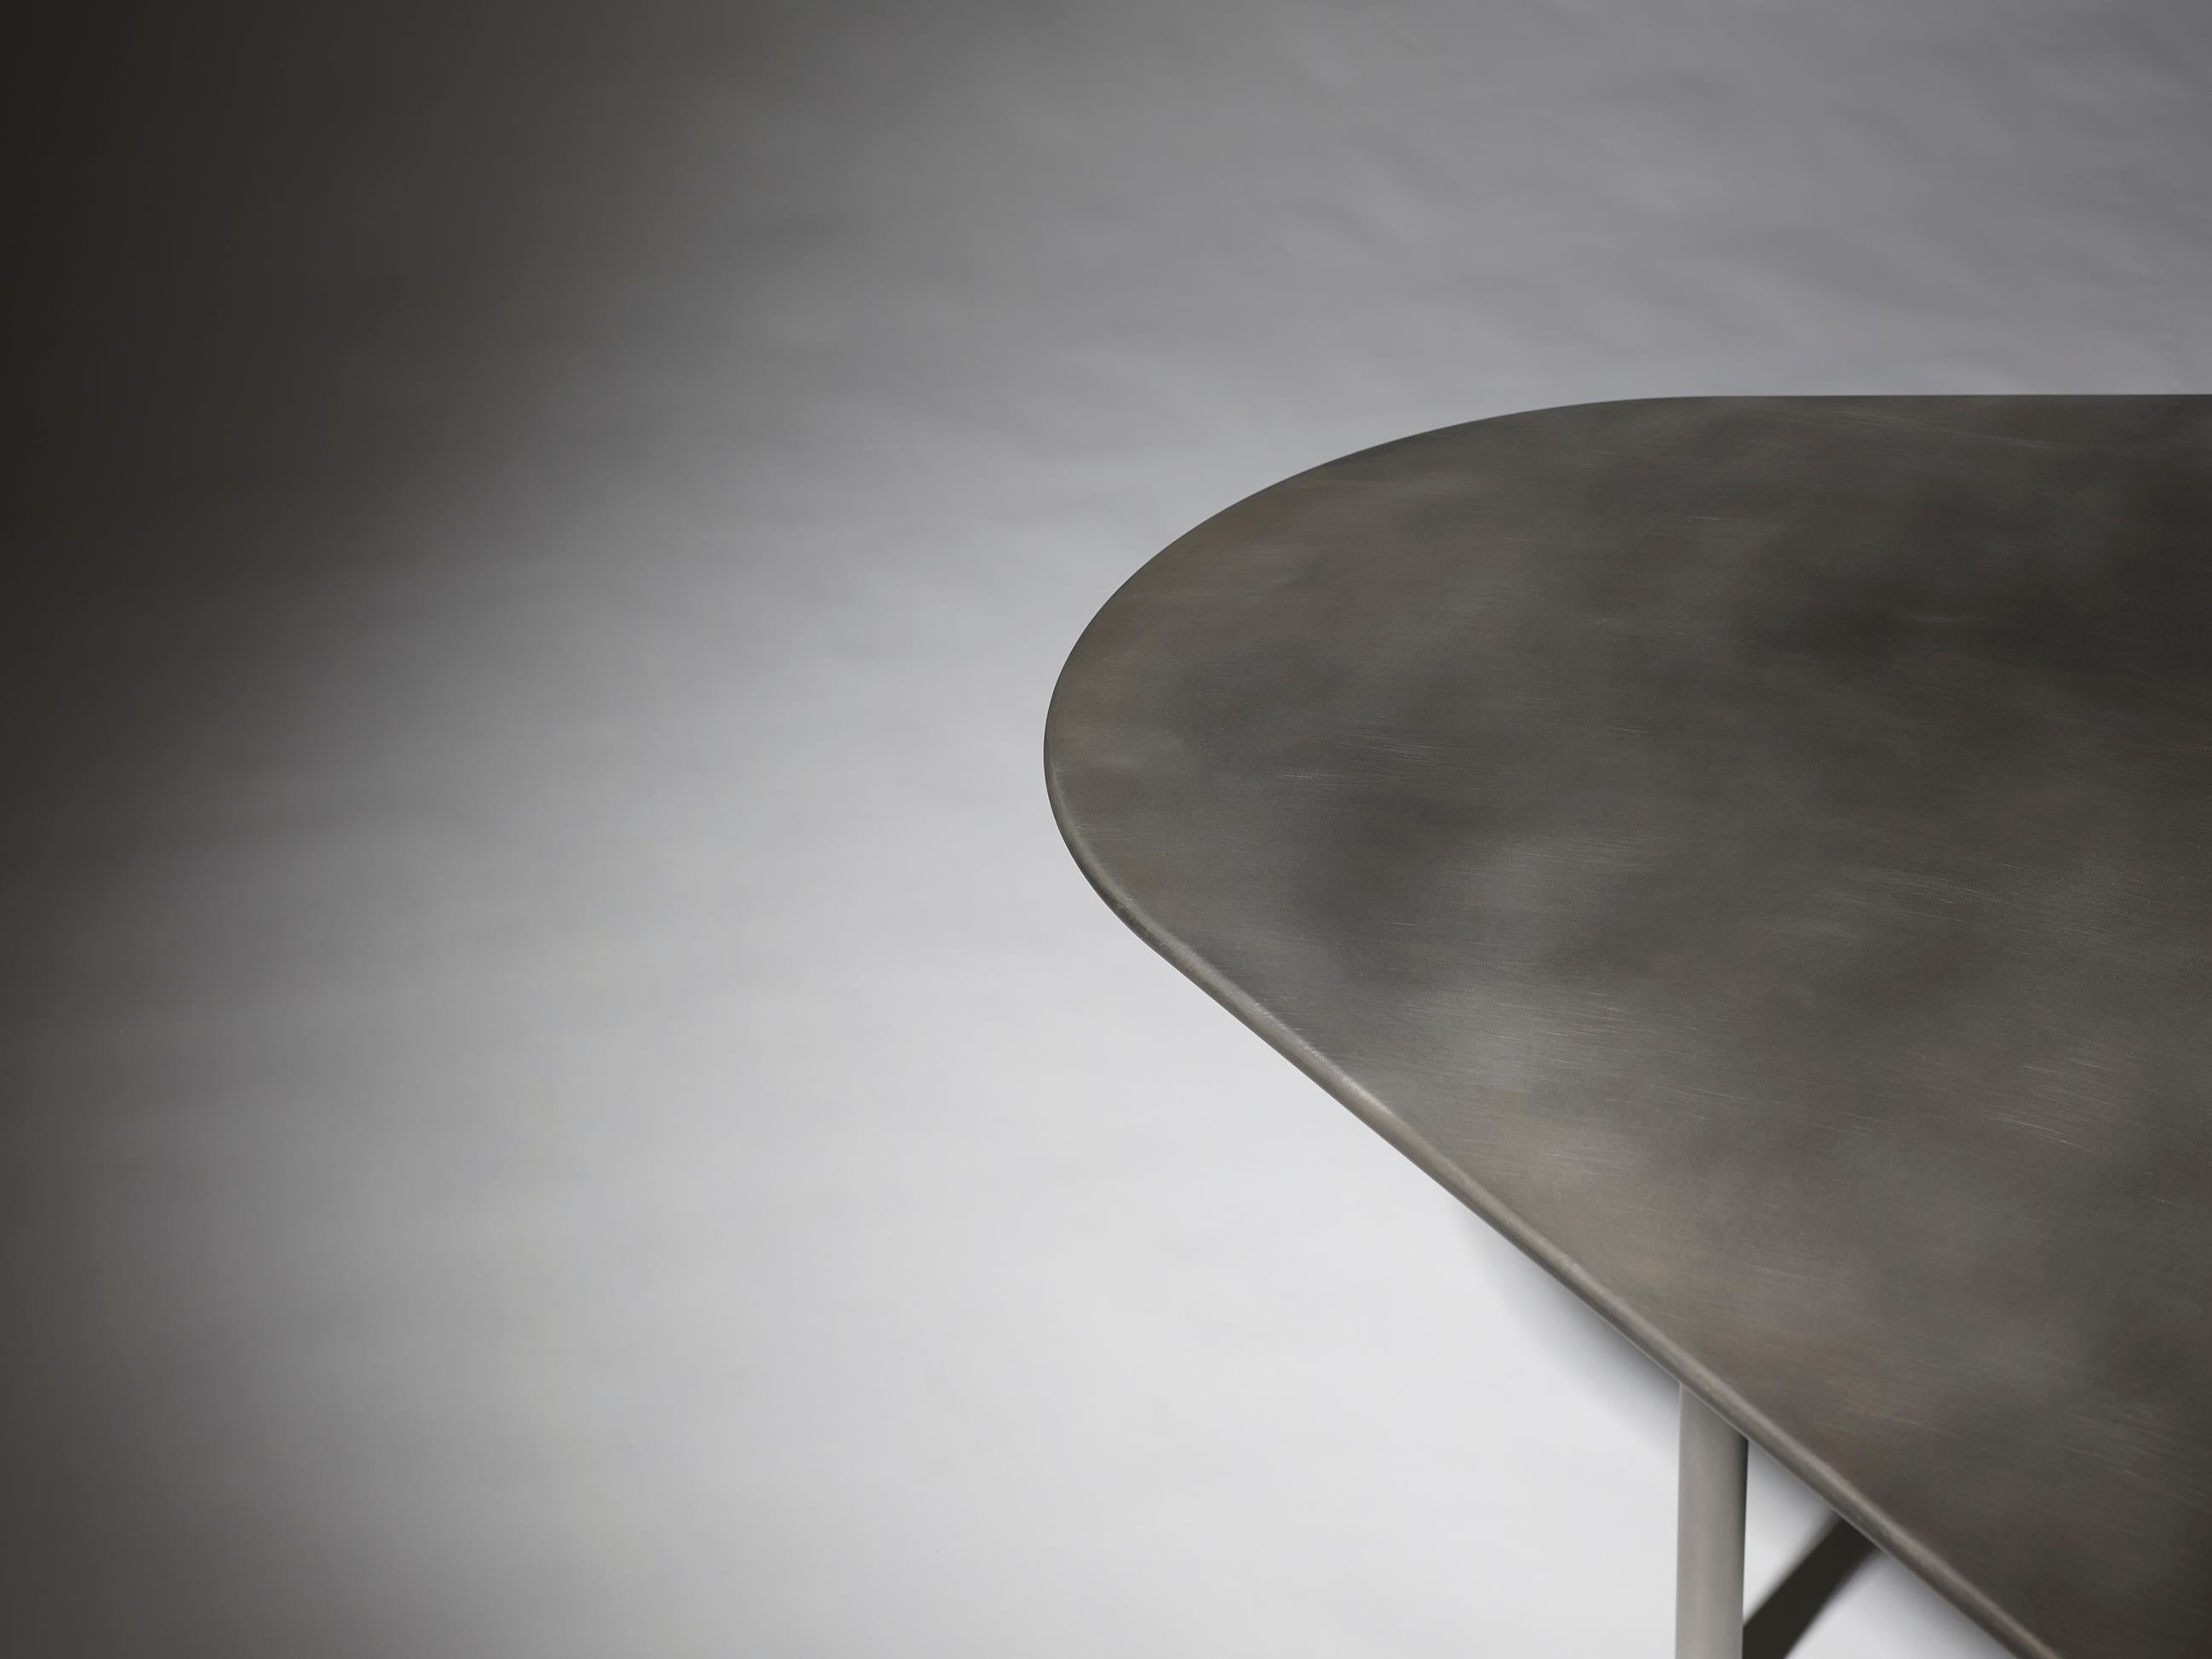 American S.C.T. 'Square, Circle, Triangle' Aluminum Table by Jonathan Nesci 'Triangle' For Sale